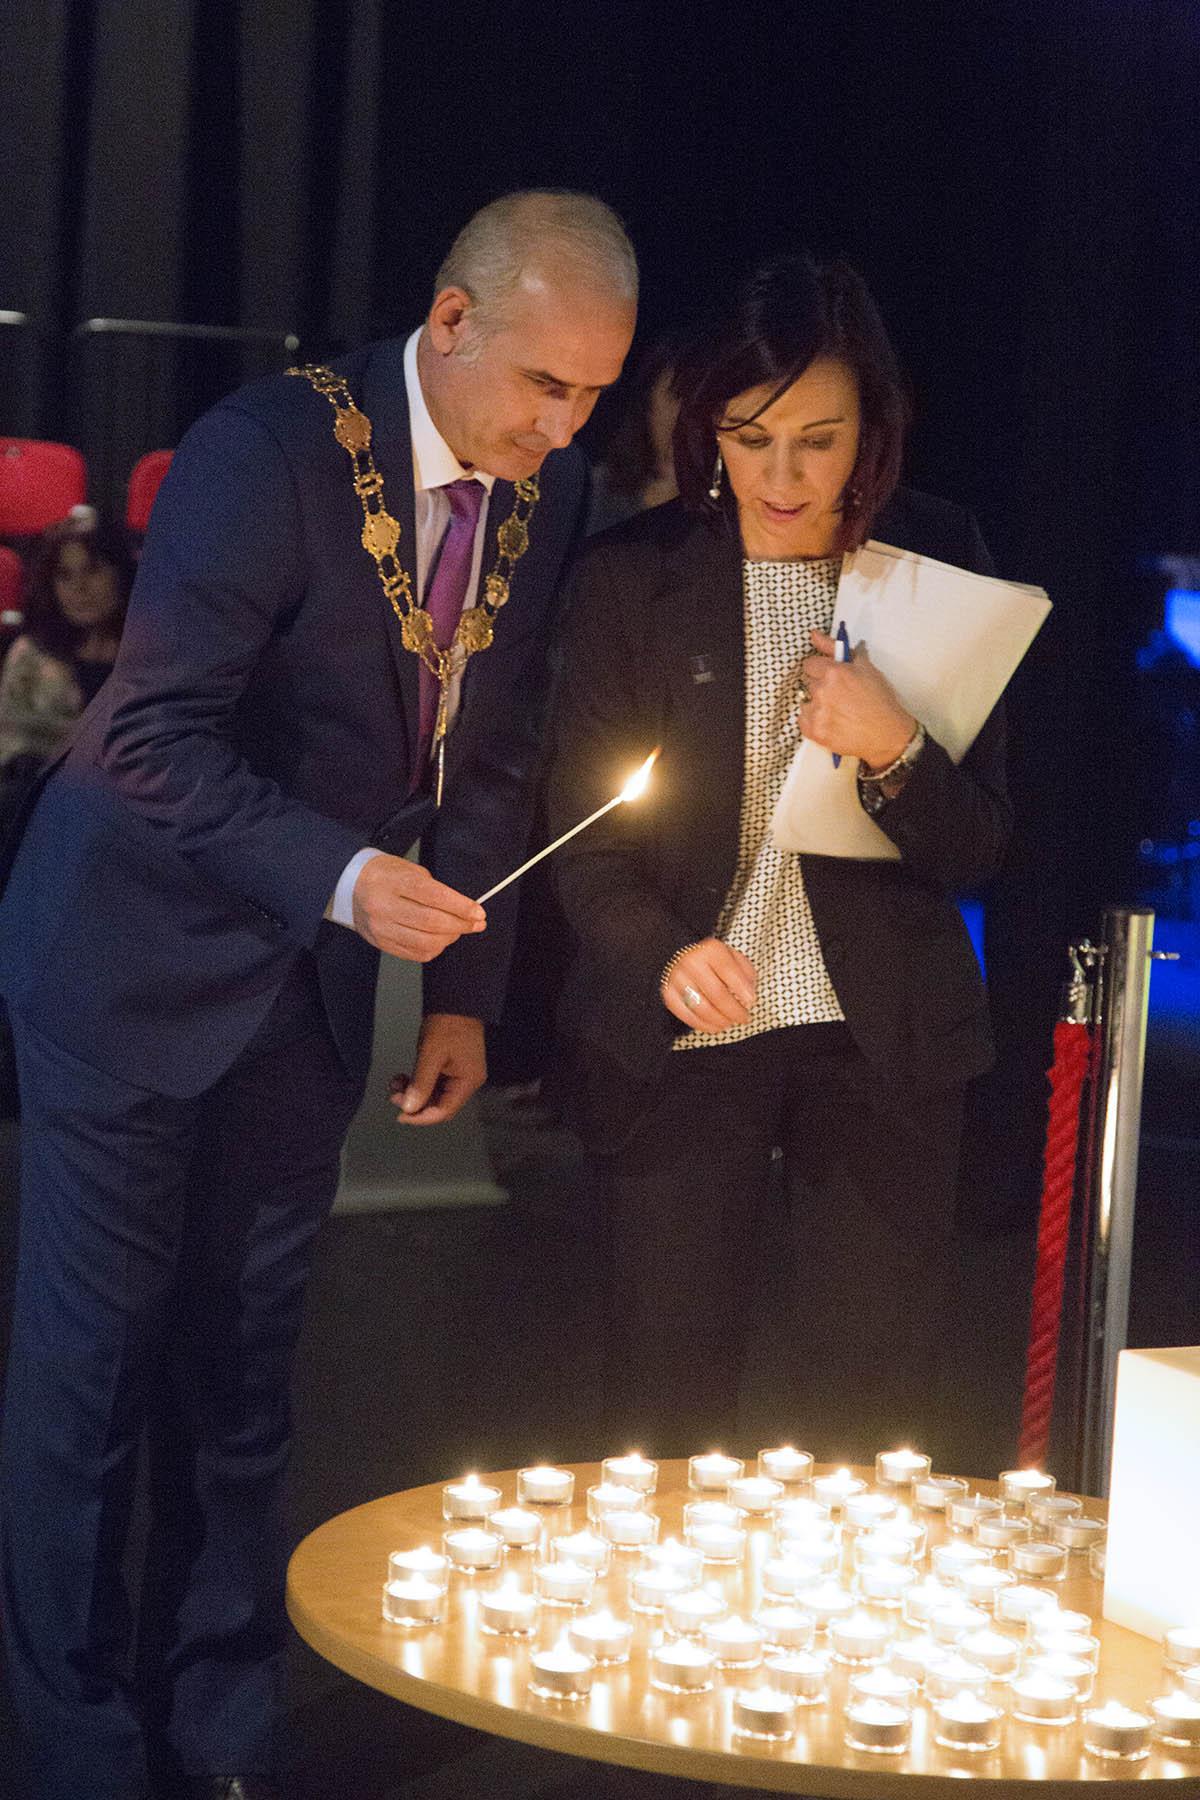 The Dugdale Centre in Enfield hosted an event to mark the 70th anniversary of Holocaust Memorial Day on Tuesday, January 27, 2015